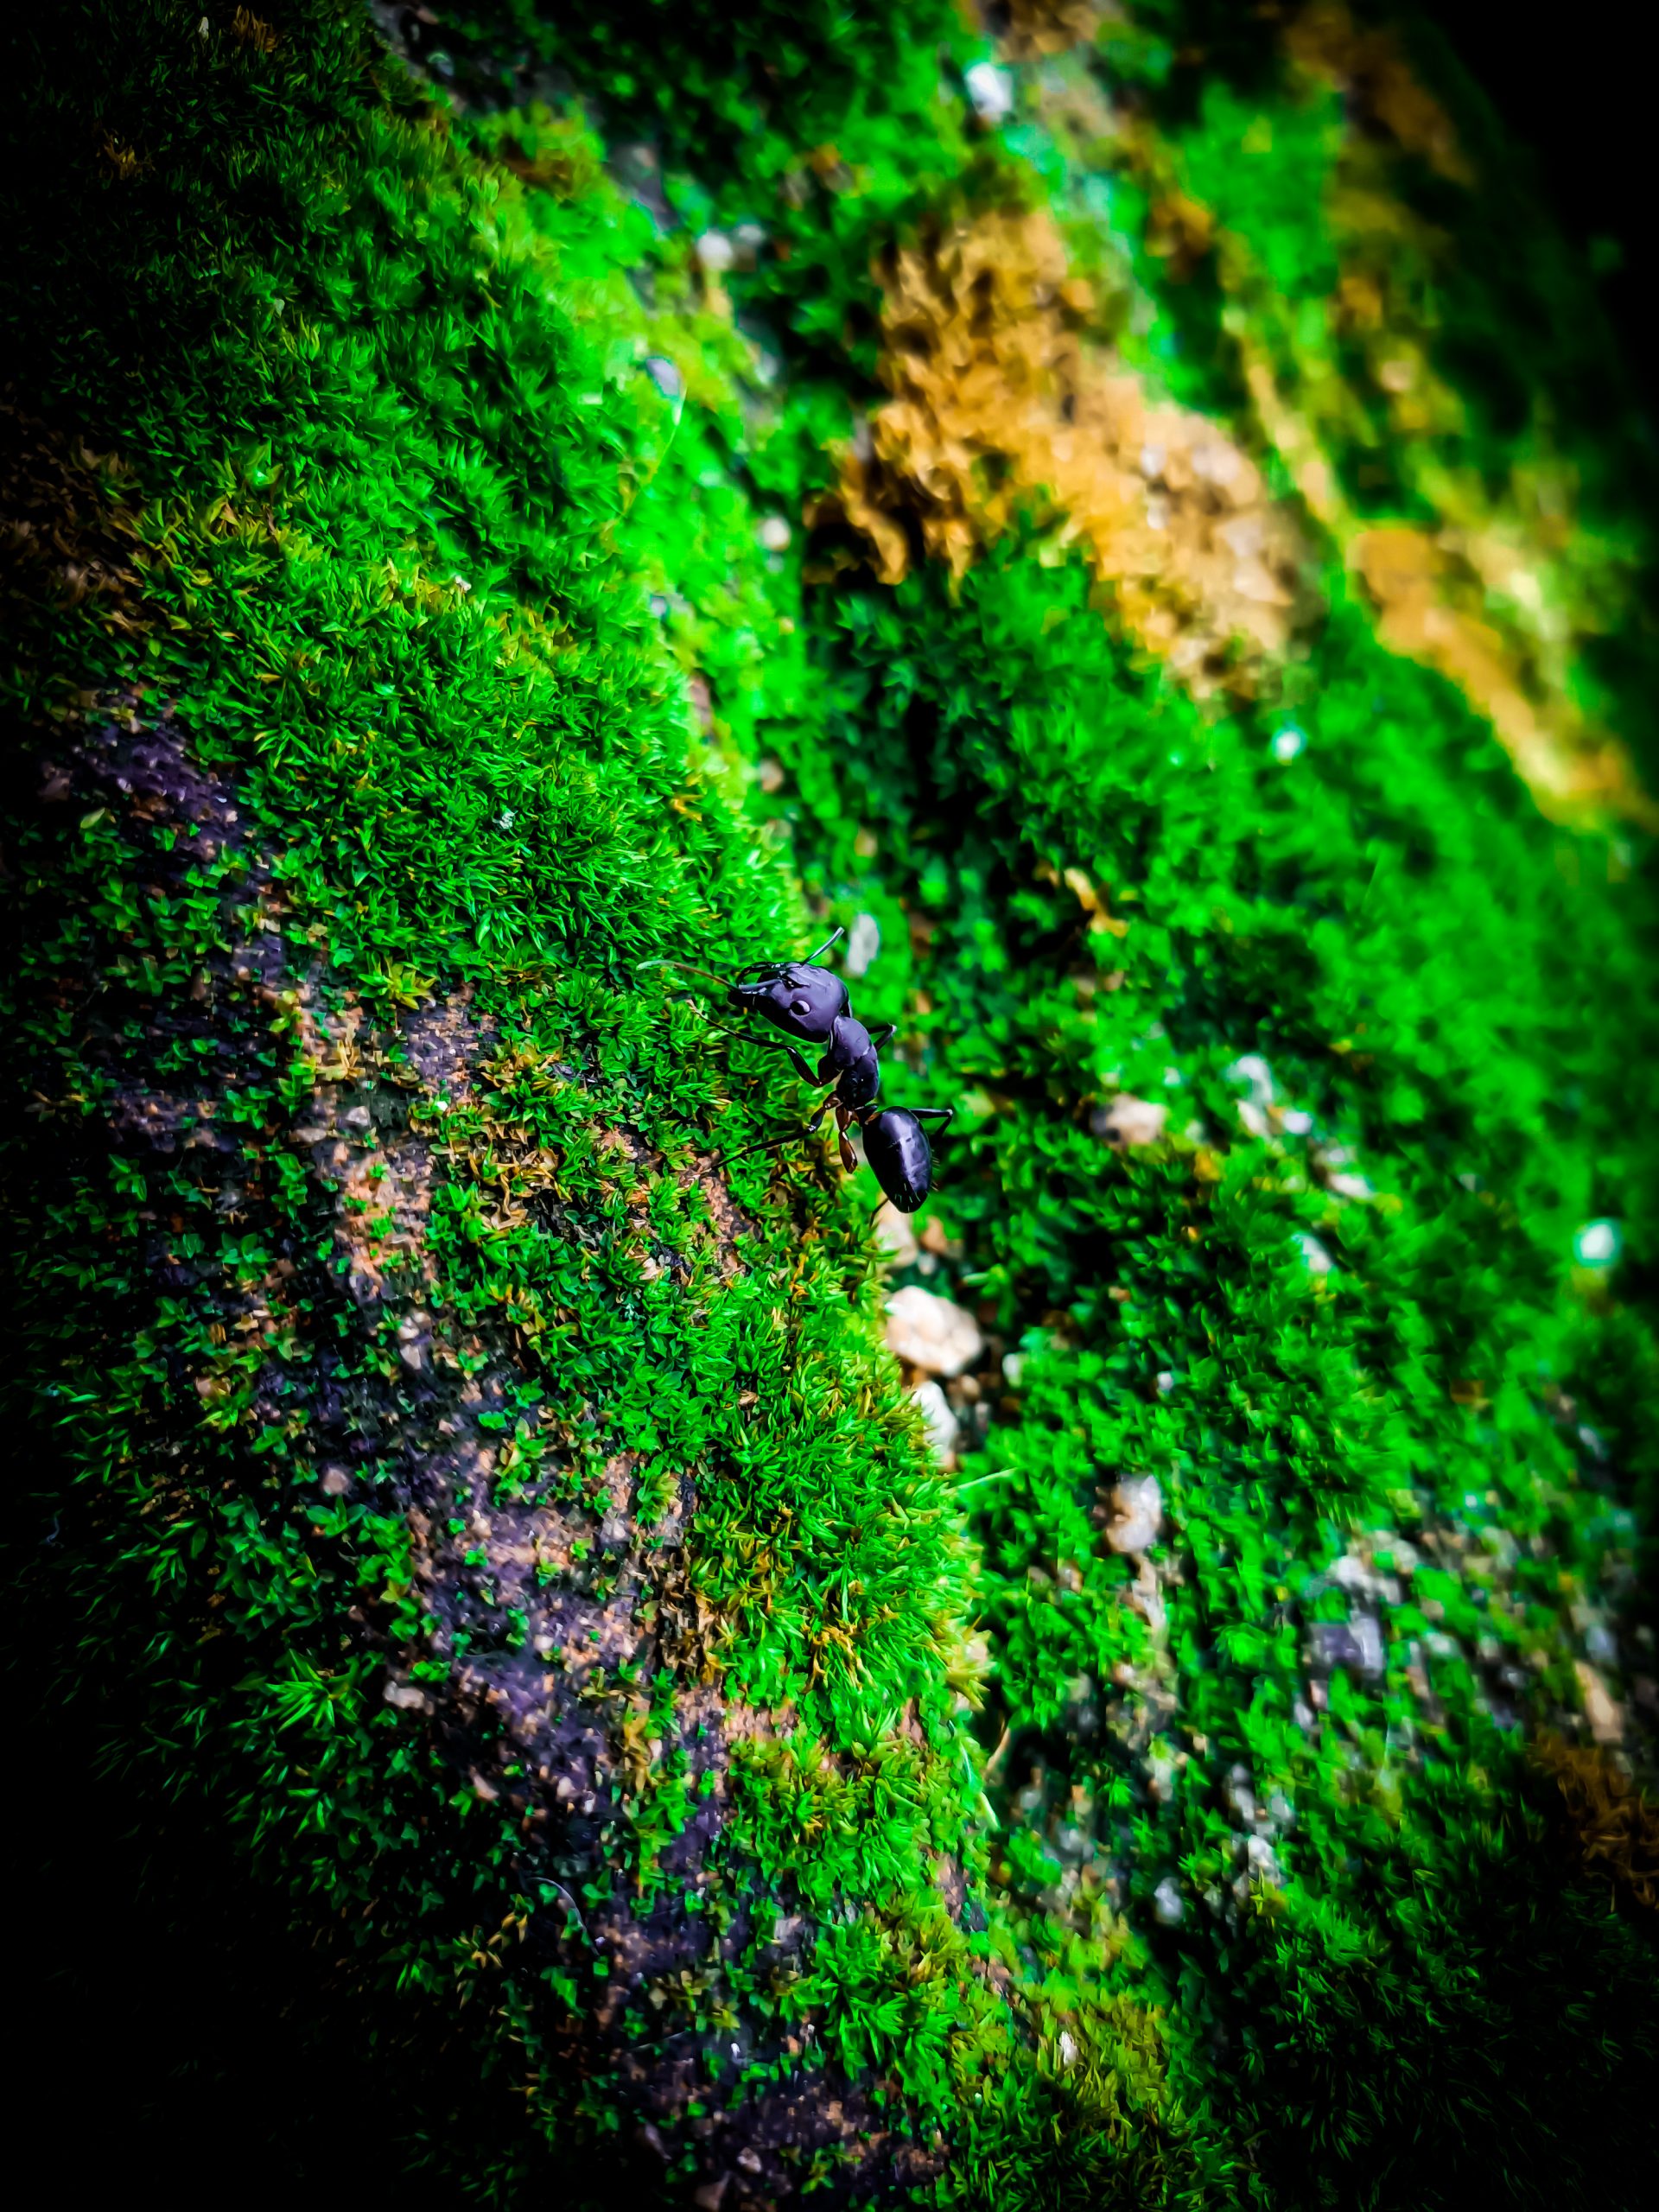 An ant on moss